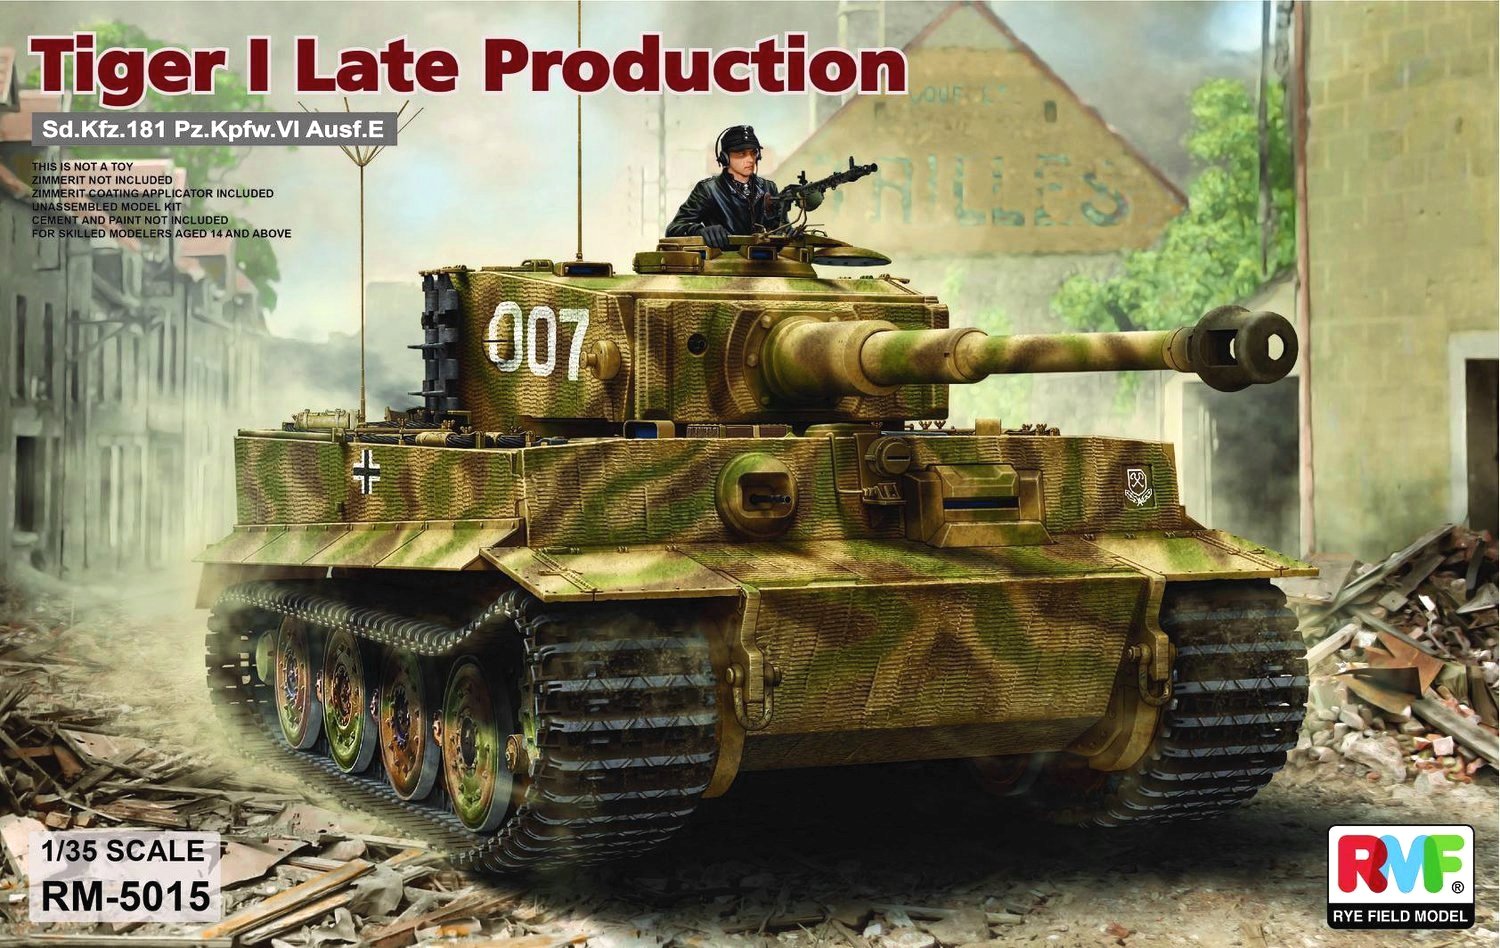 Tiger I Late Production (Michael Wittmann)